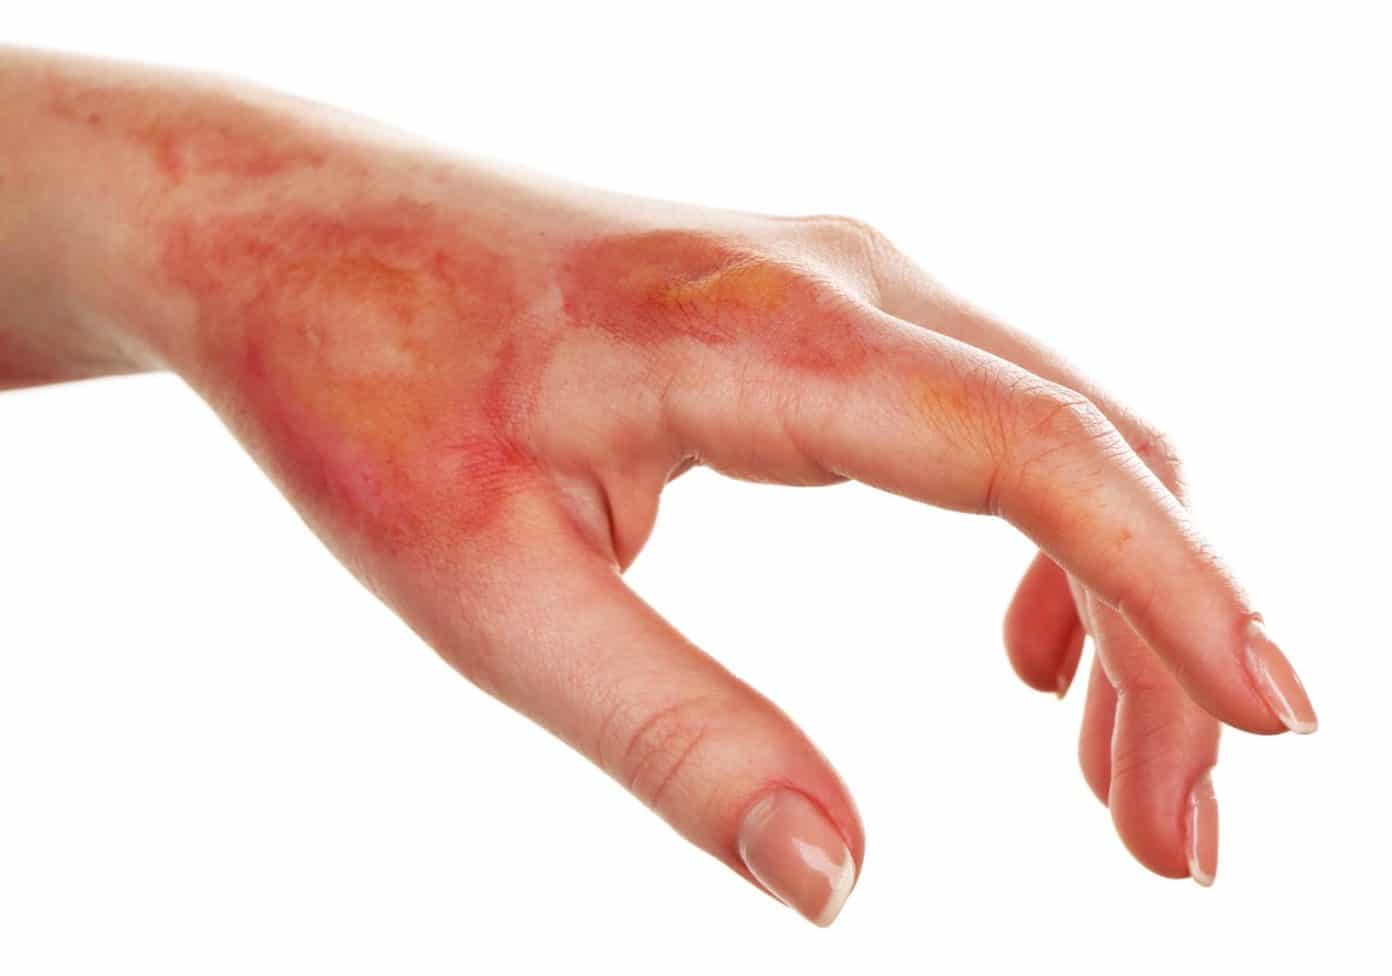 A Non Invasive Method Developed To Assess Burn Wound Healing